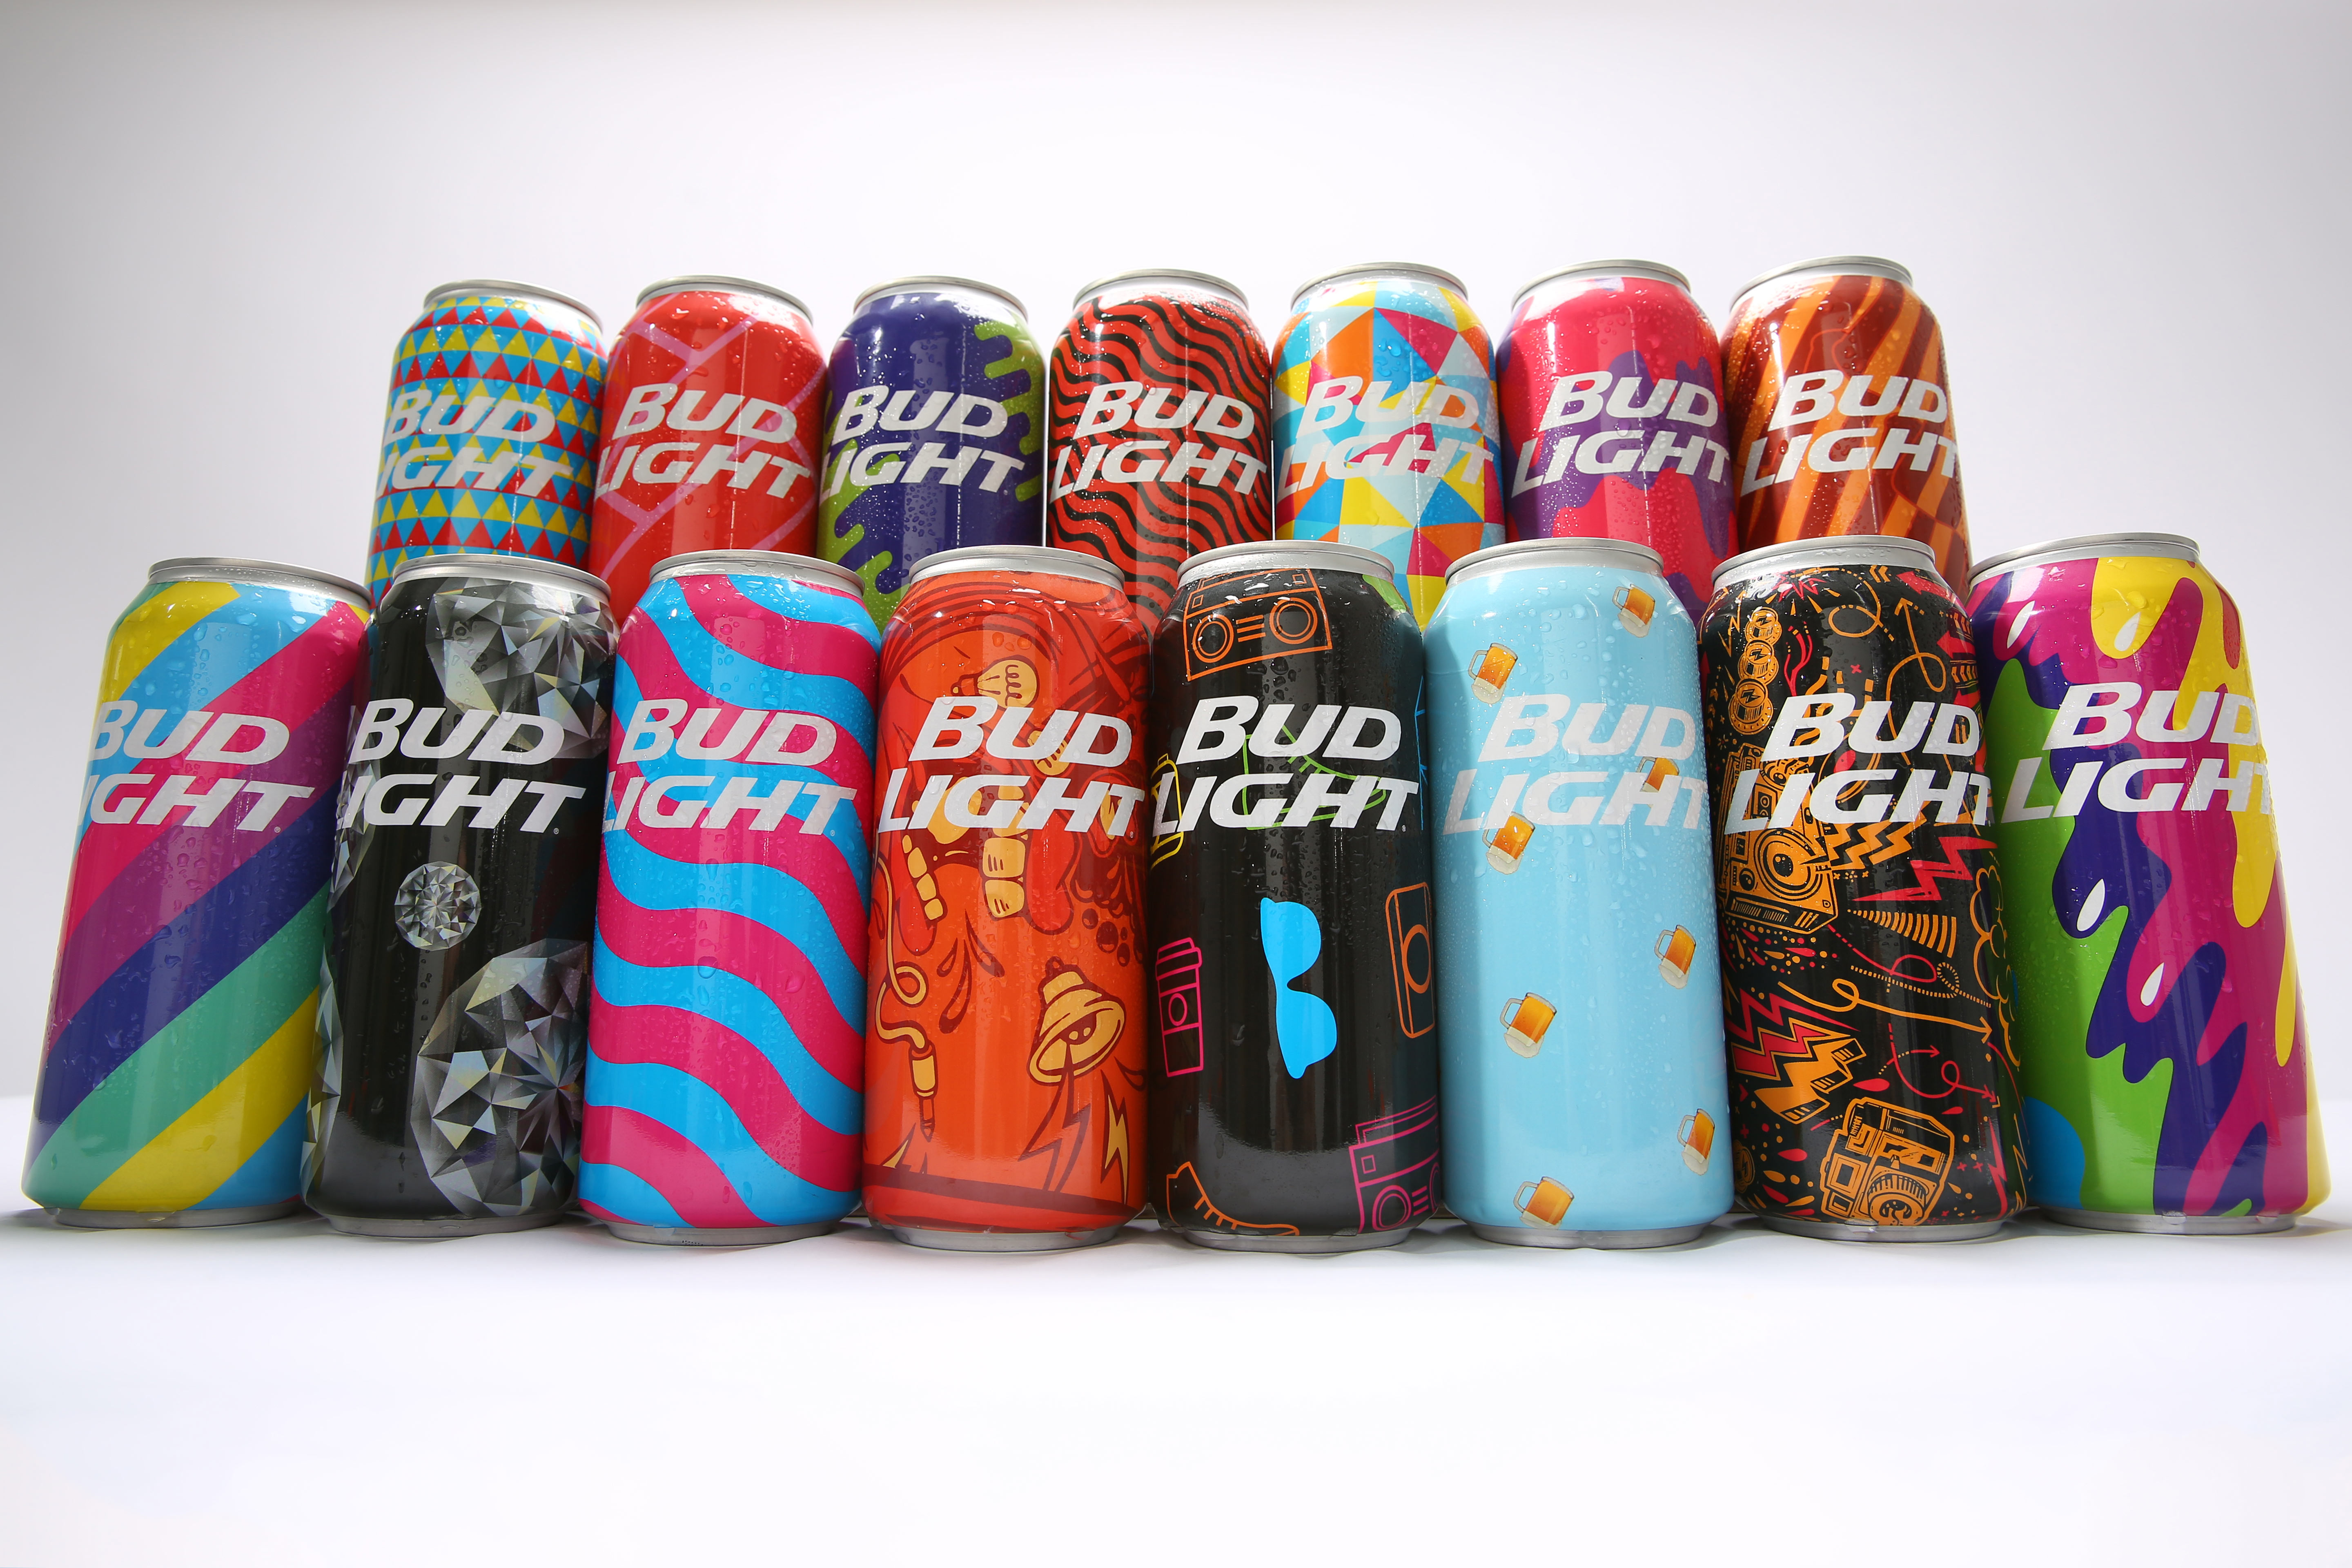 Bud Light Releases Limited Edition Festival Cans for Summer Partnership